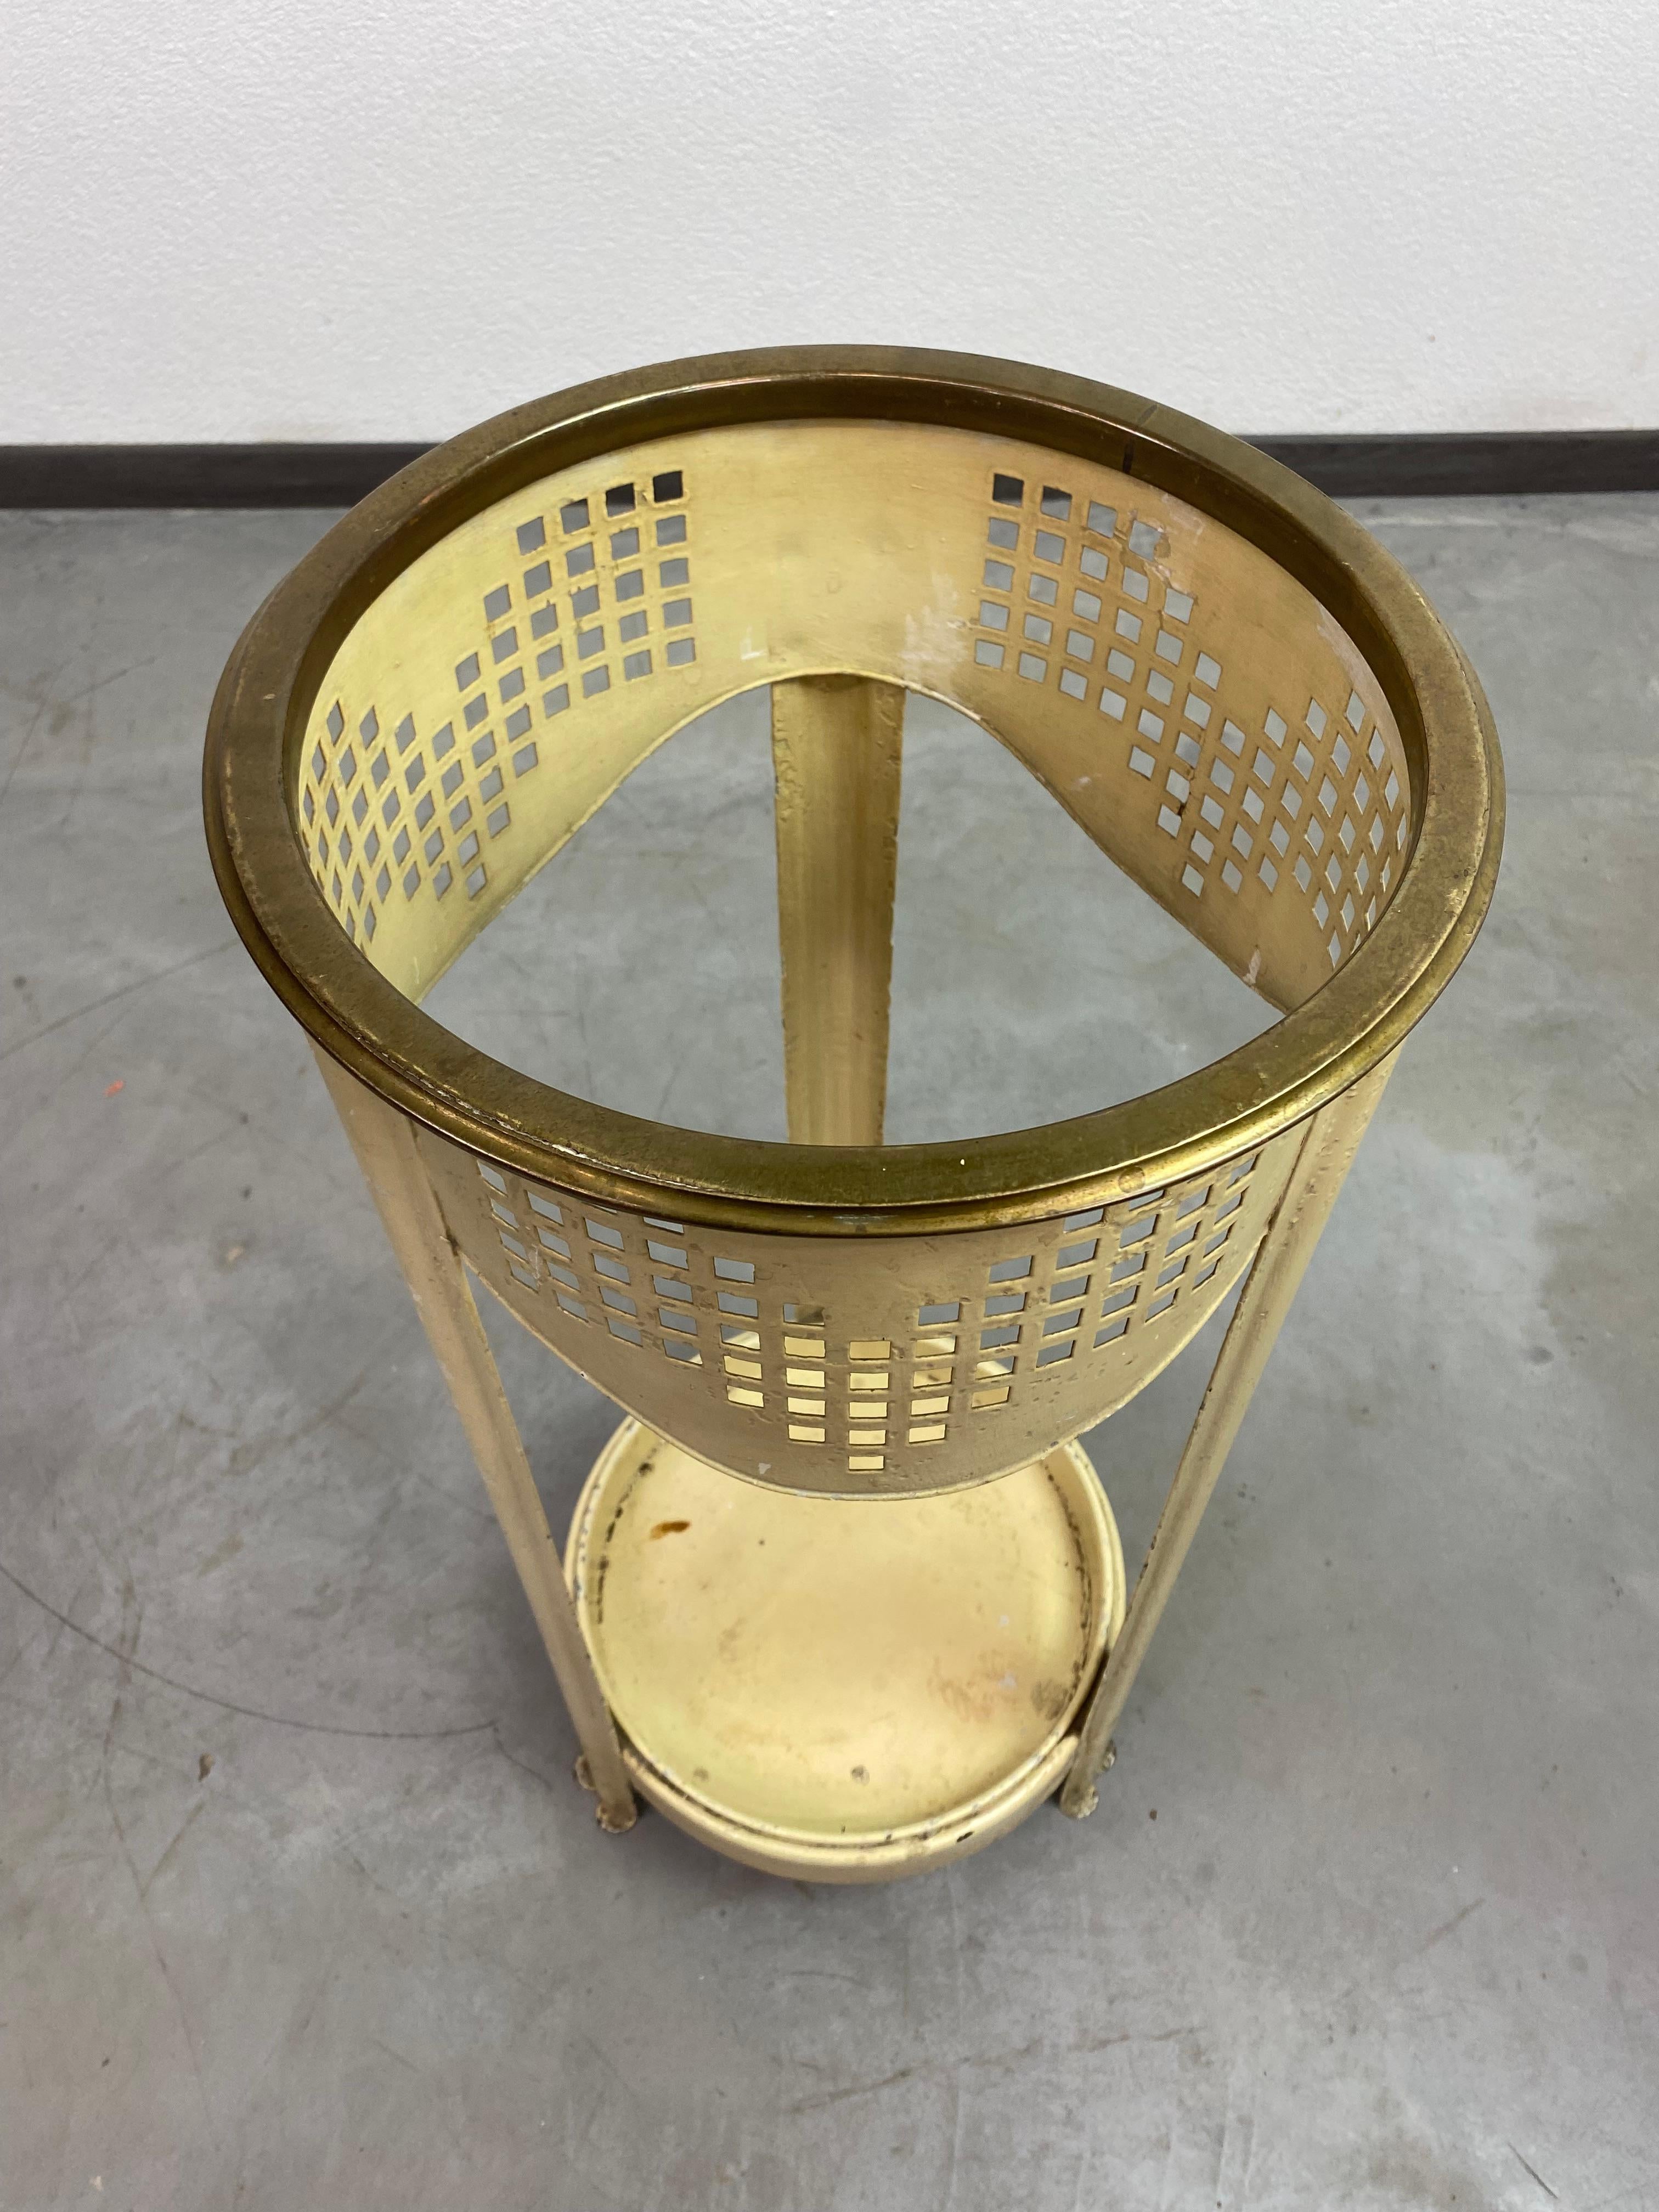 Metal Umbrella stand attributed to Josef Hoffmann - Kolo Moser For Sale